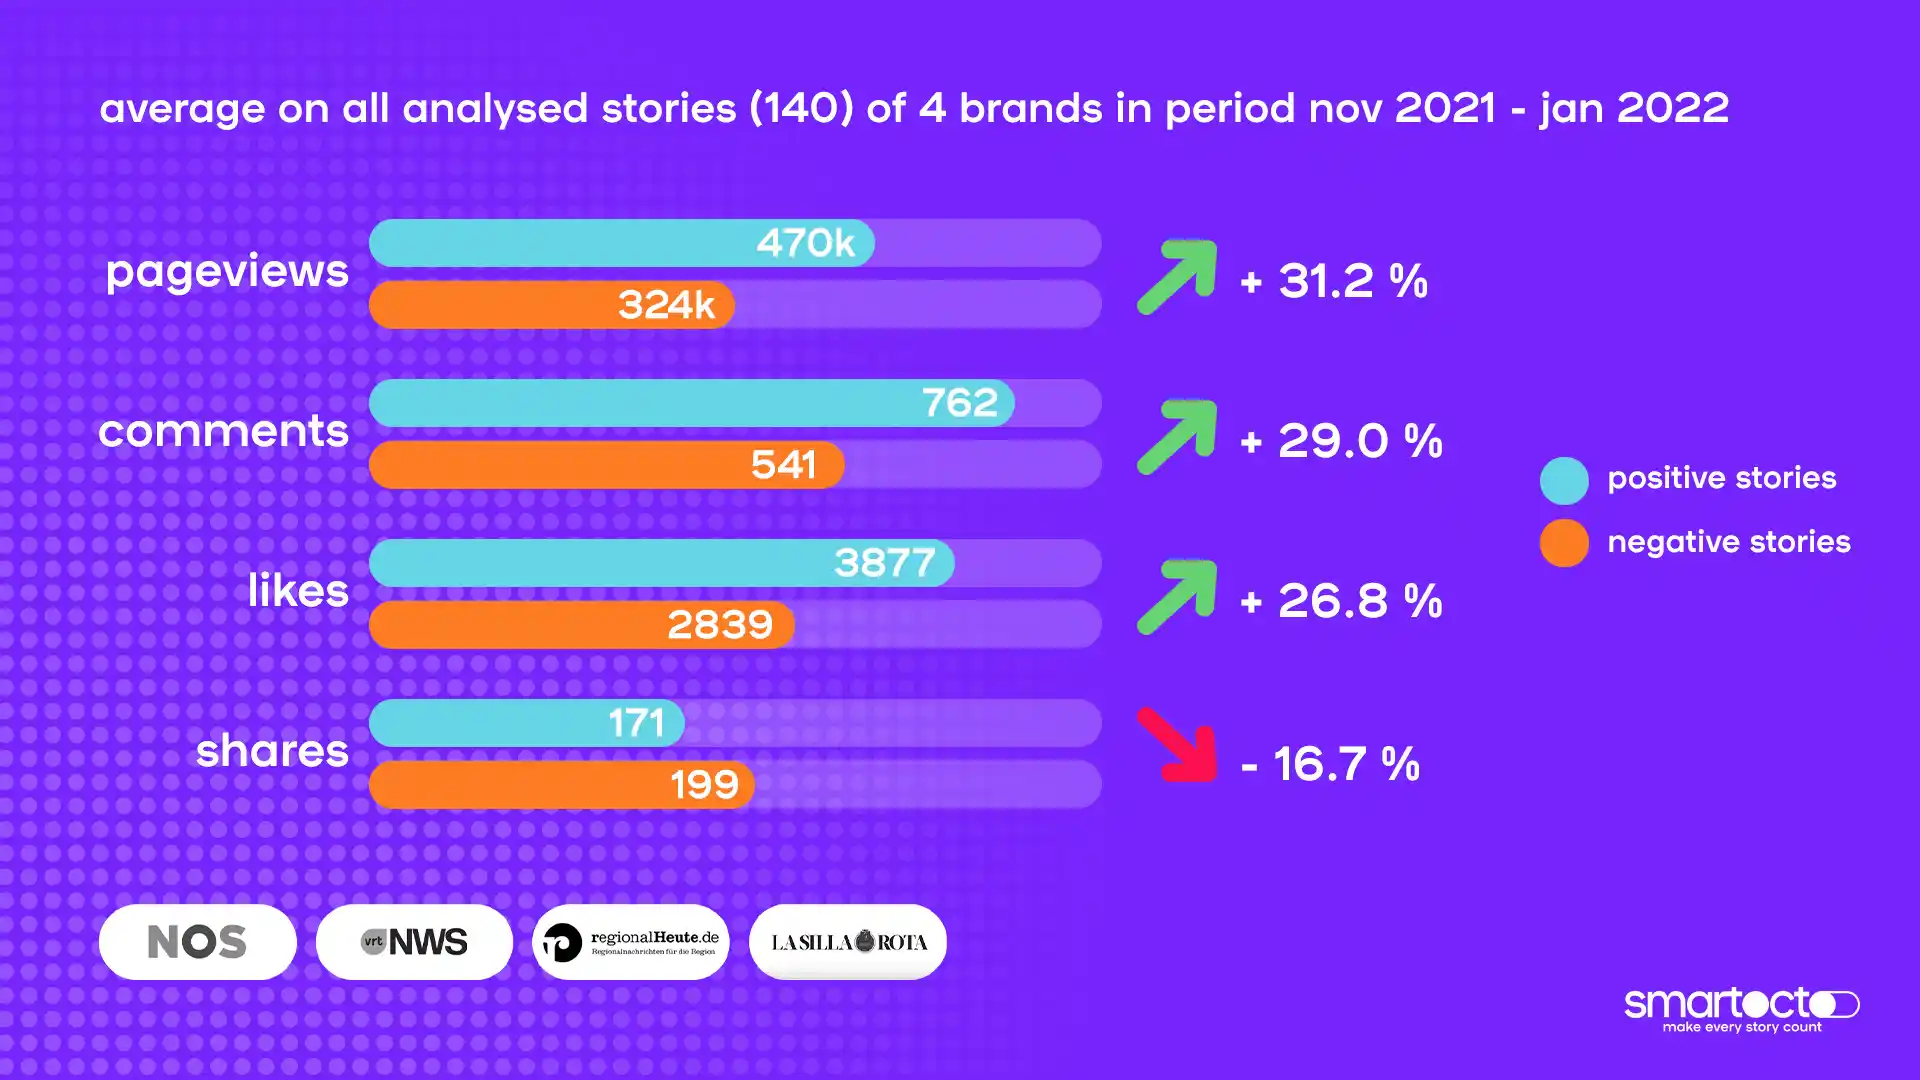 average on all analysed stories (140) of 4 brands in period nov 2021 - jan 2022